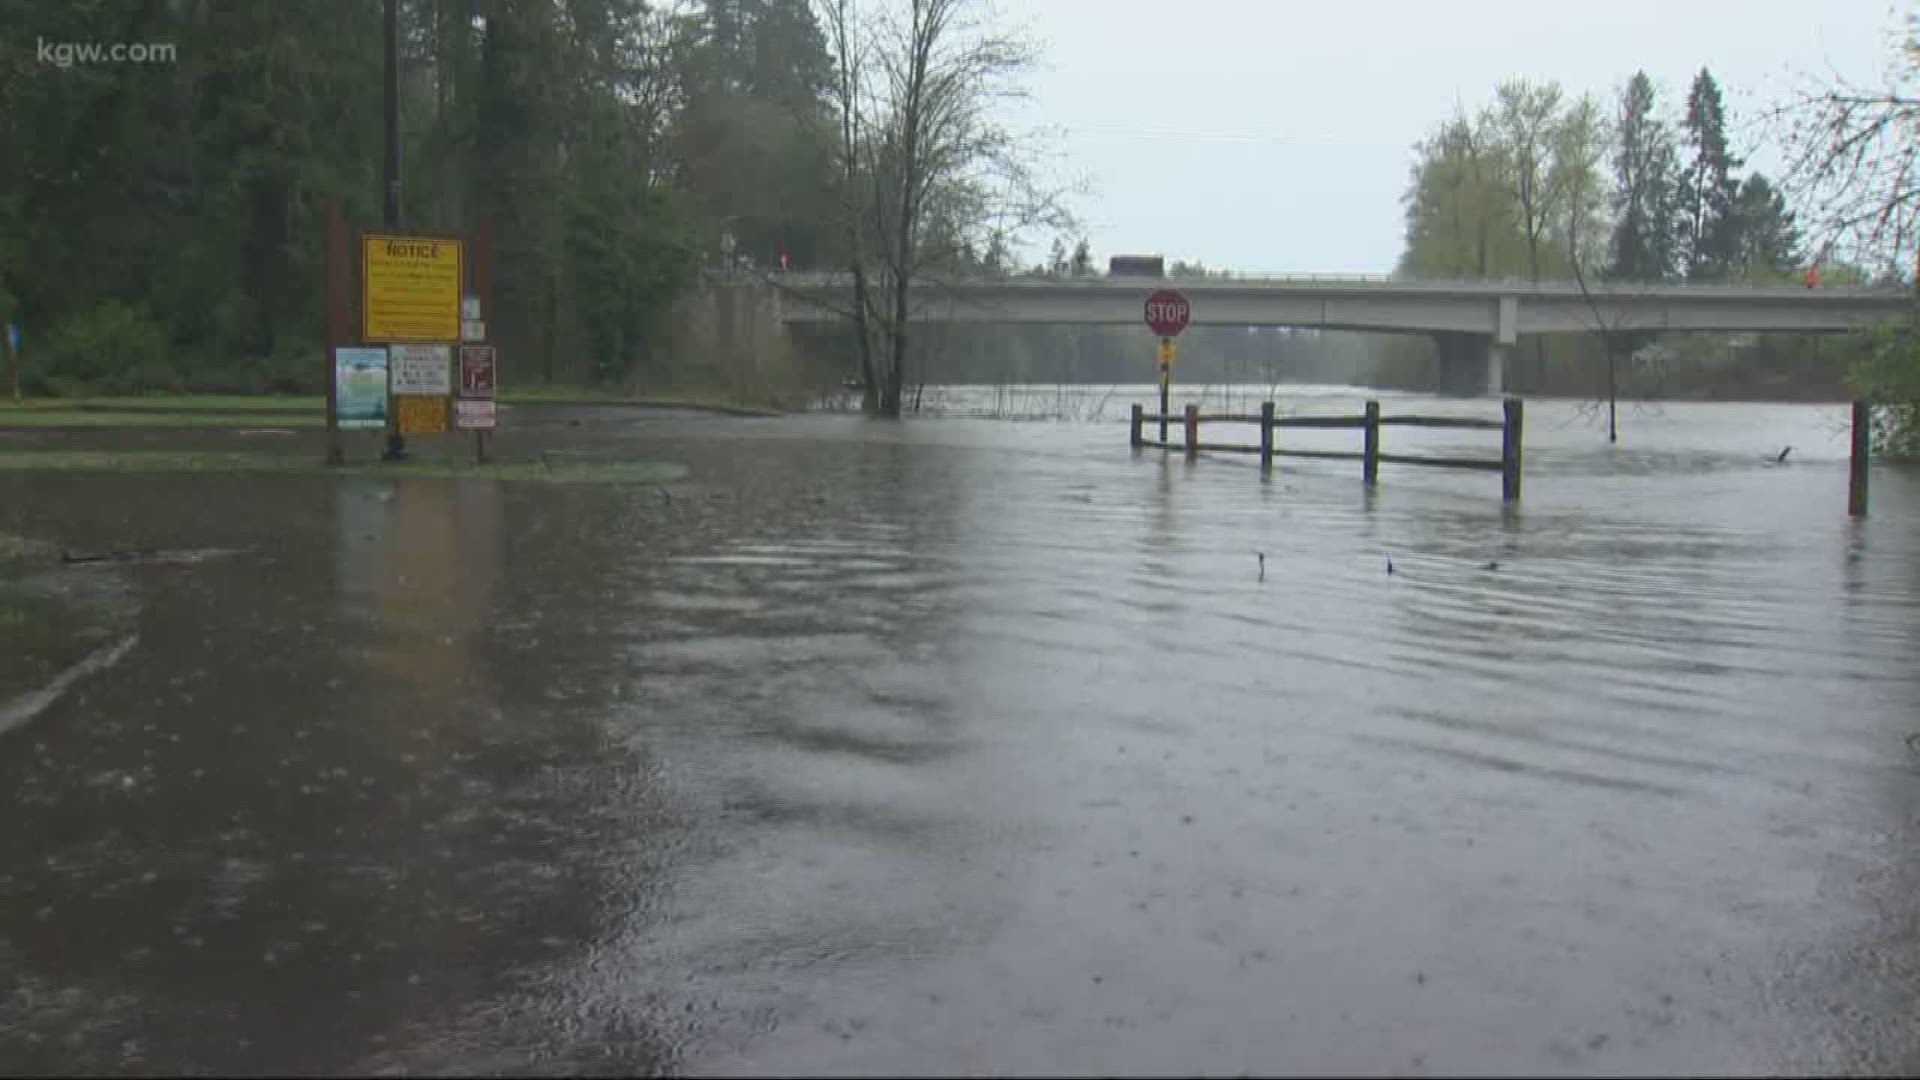 Fast-rising flood waters are wreaking havoc and forcing rescues across the Portland area. And it’s only expected to get worse from here.